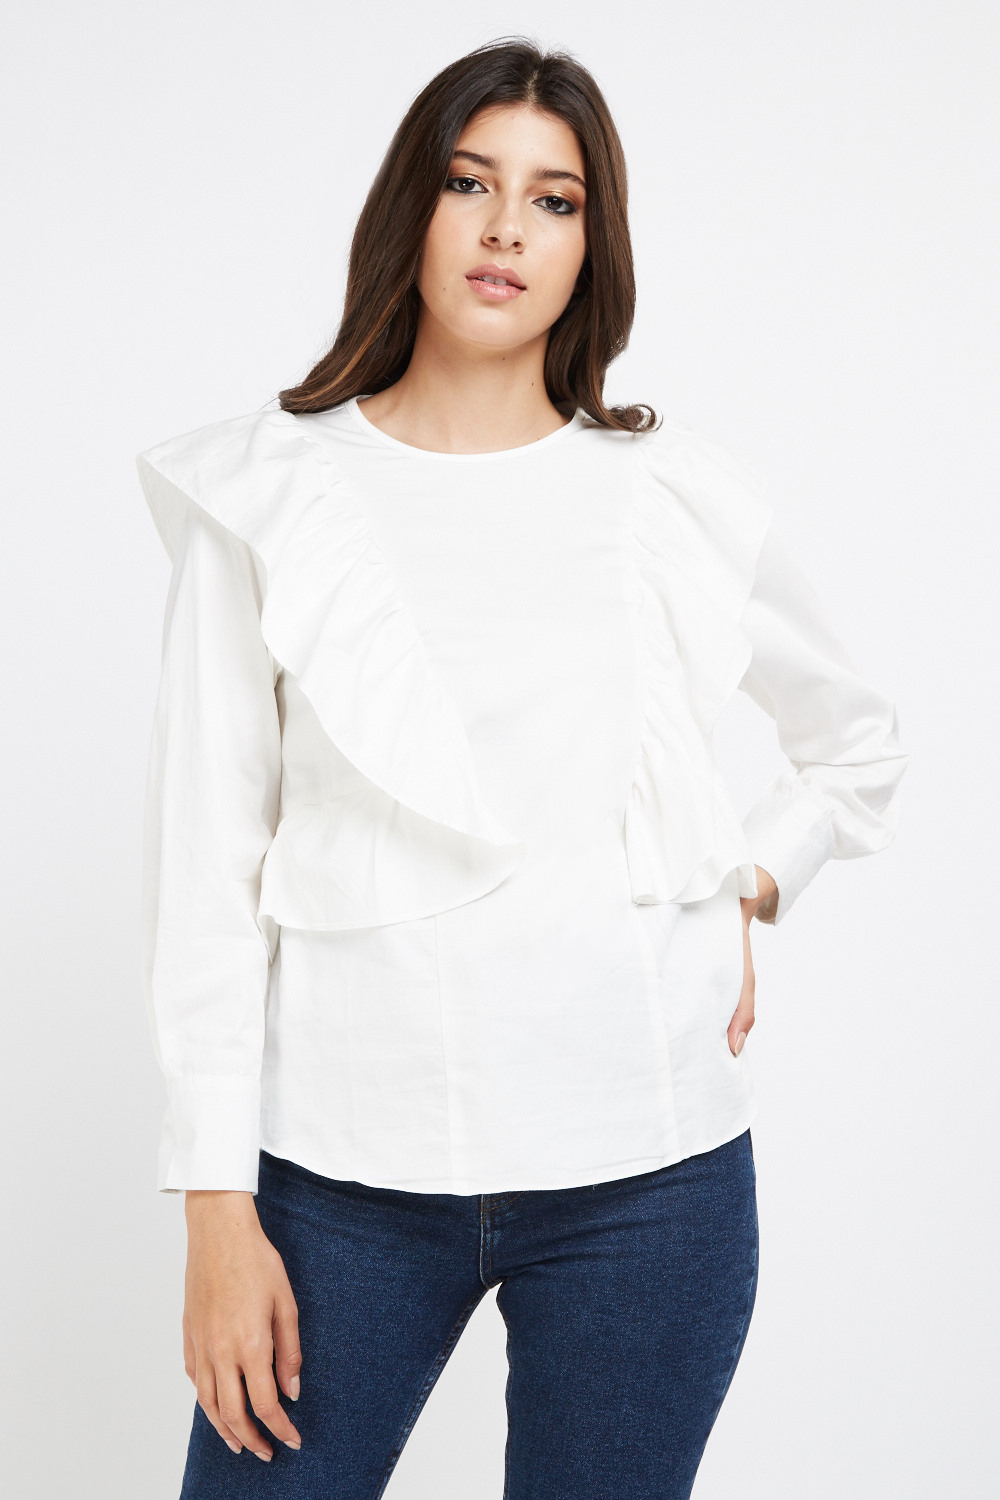 celebrity wearing white overlay blouse vince